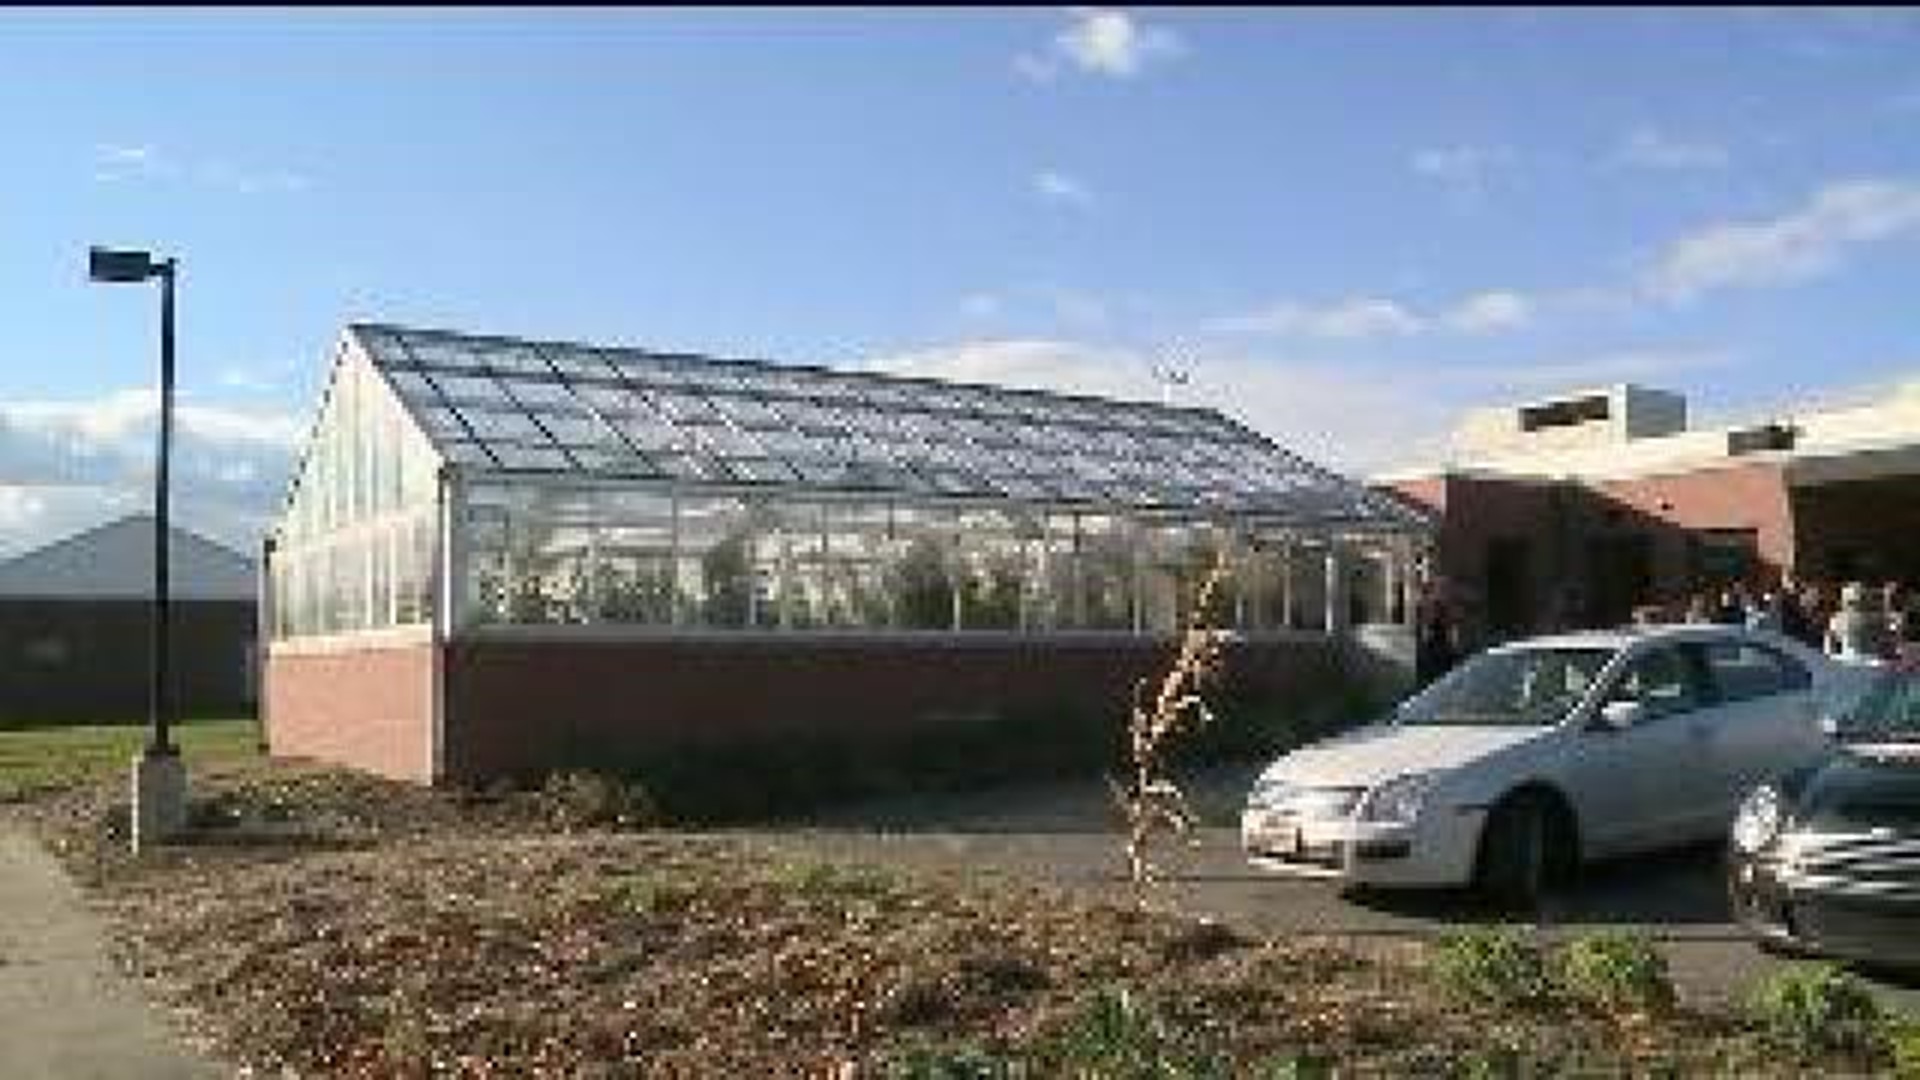 Honoring A Community Leader With Greenhouse Celebration